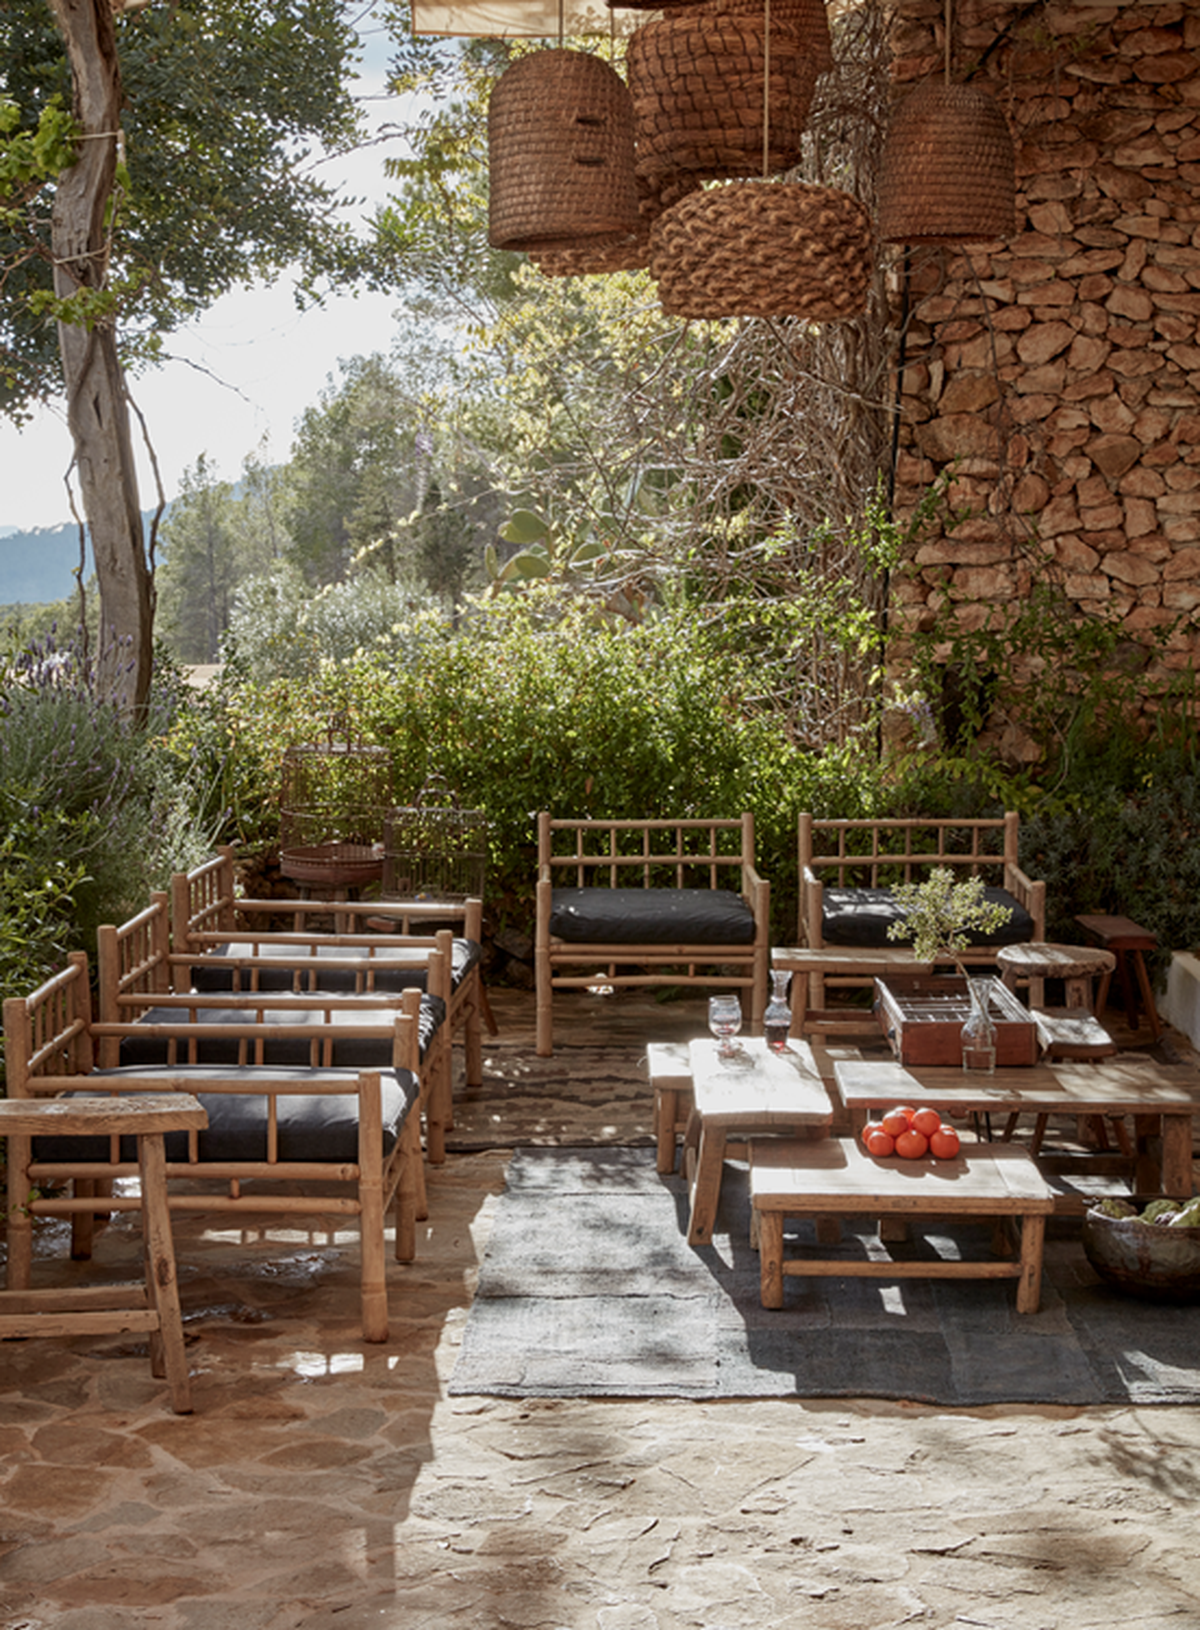 La Granja Ibiza is the first Design Hotels experiment. A members only retreat.